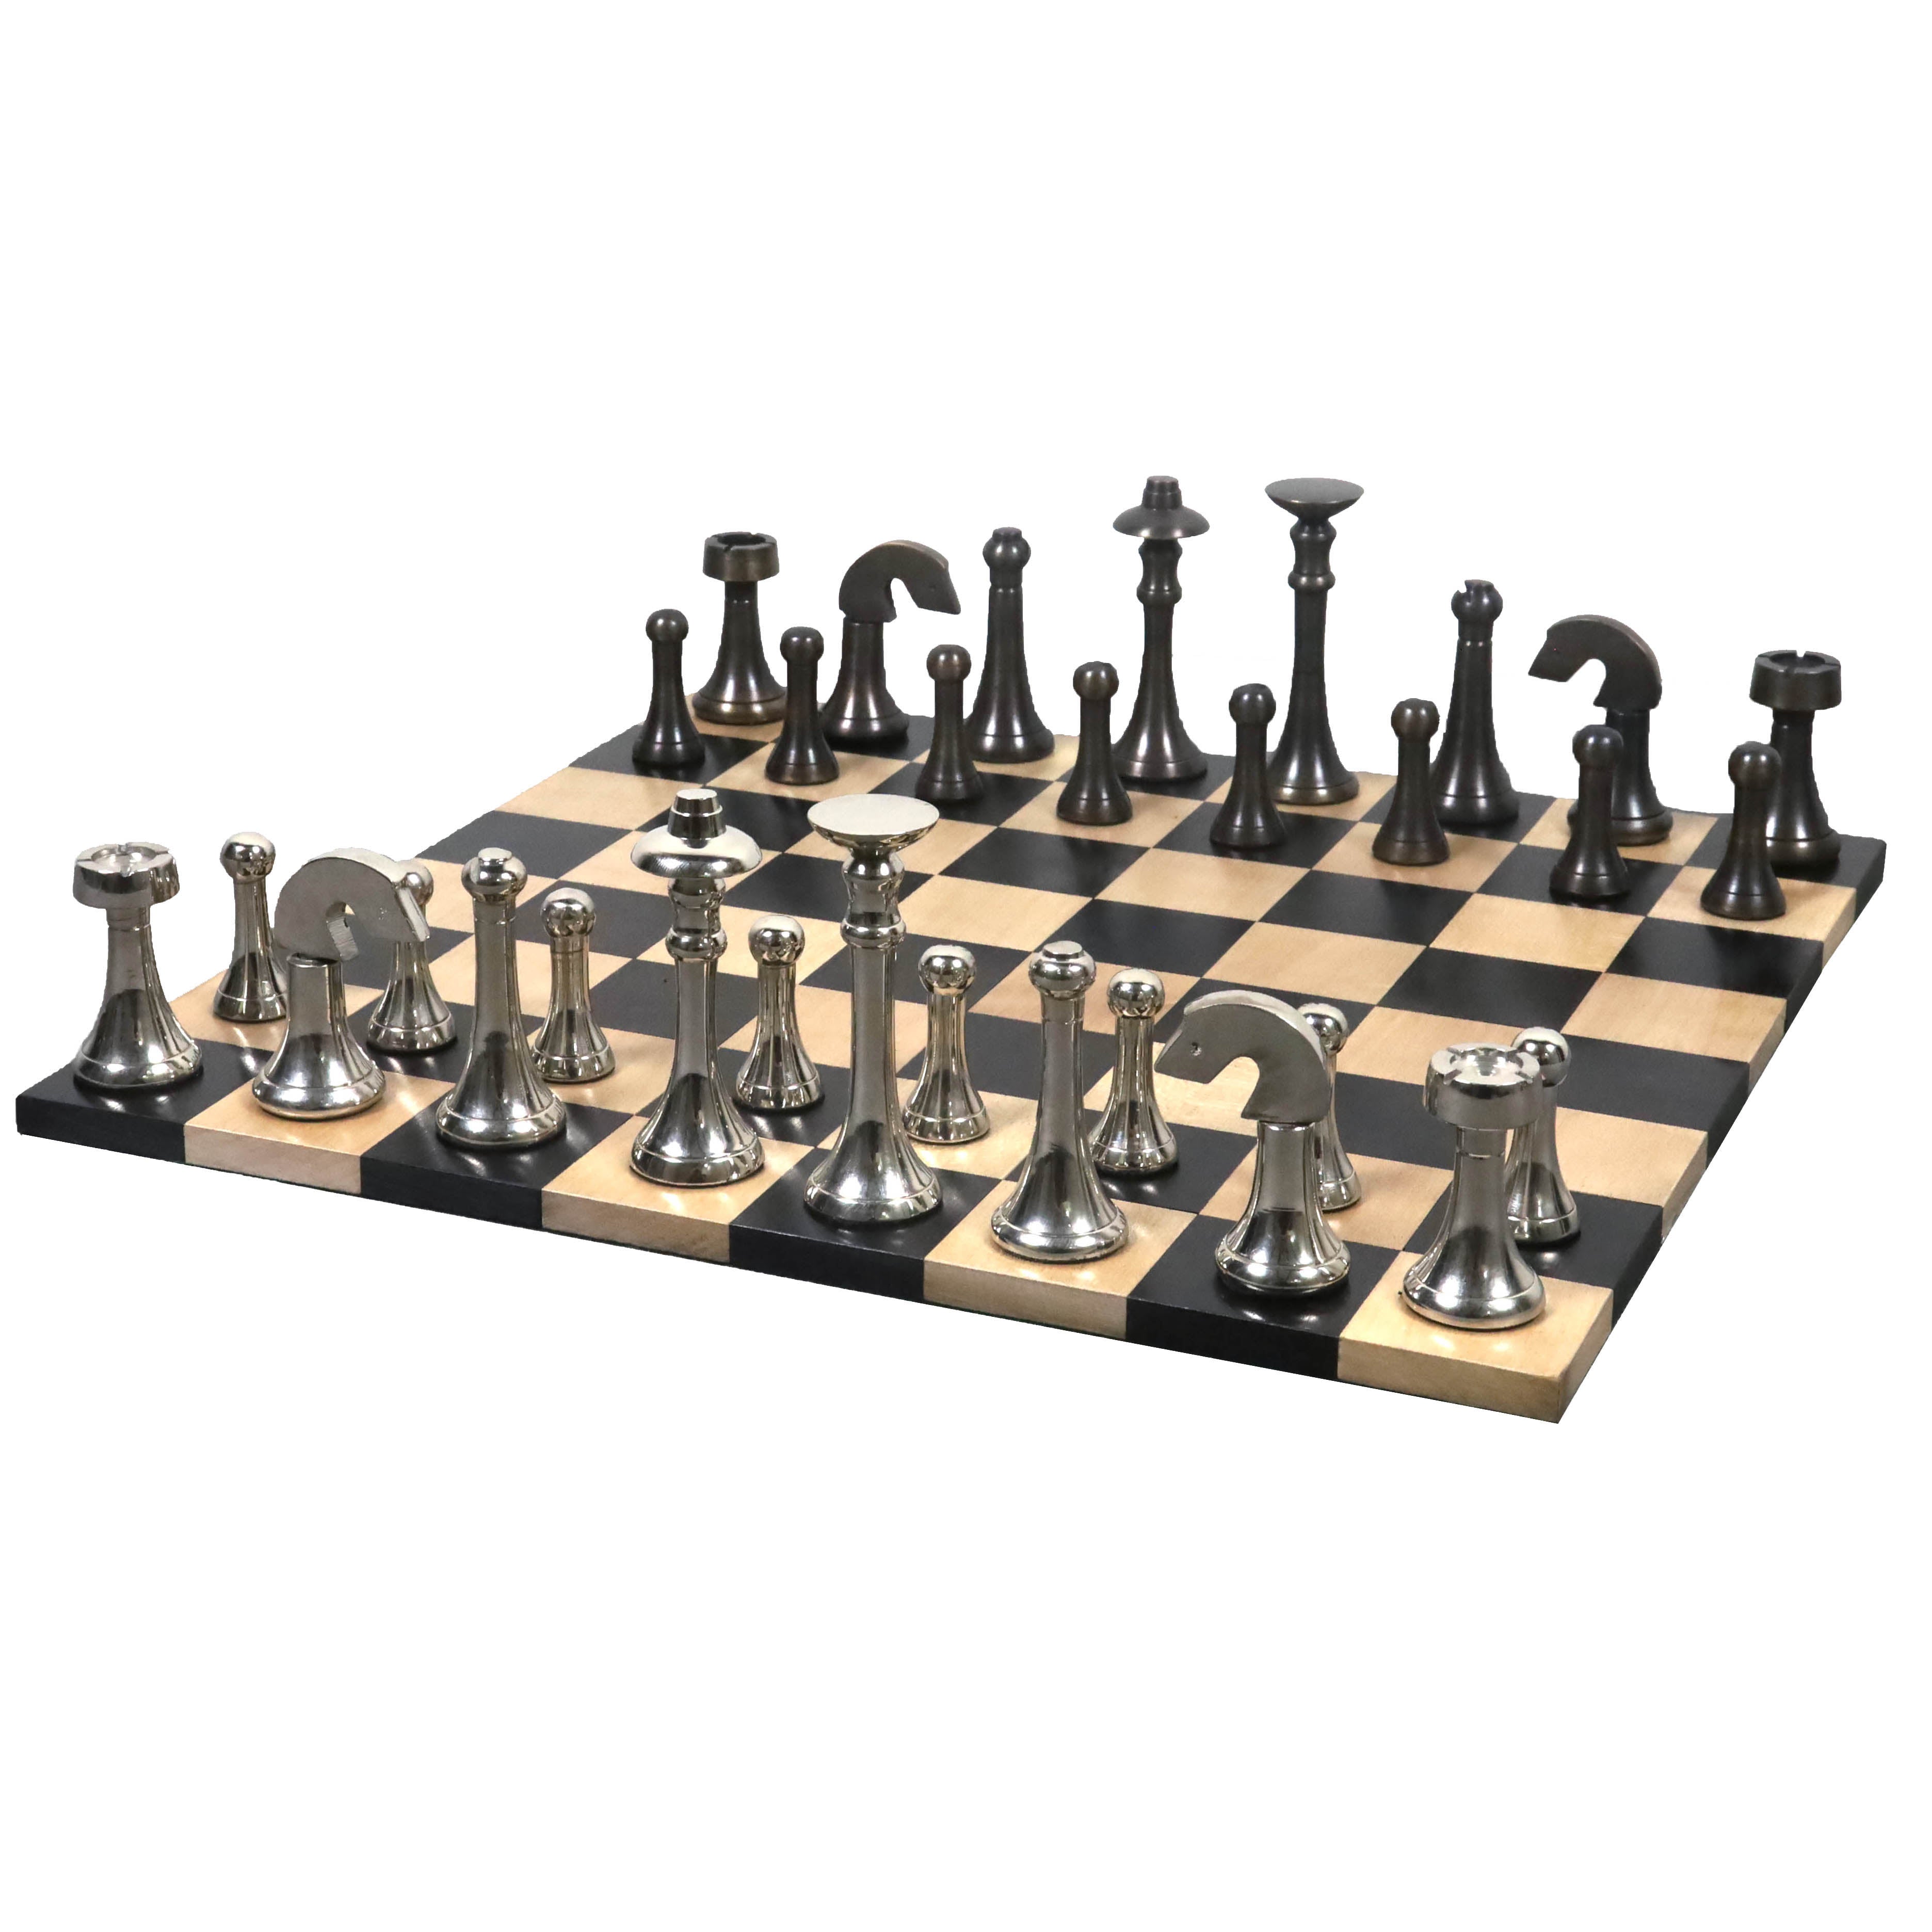 19 Inch Chess Set Royal Rose, Luxury Chess Sets